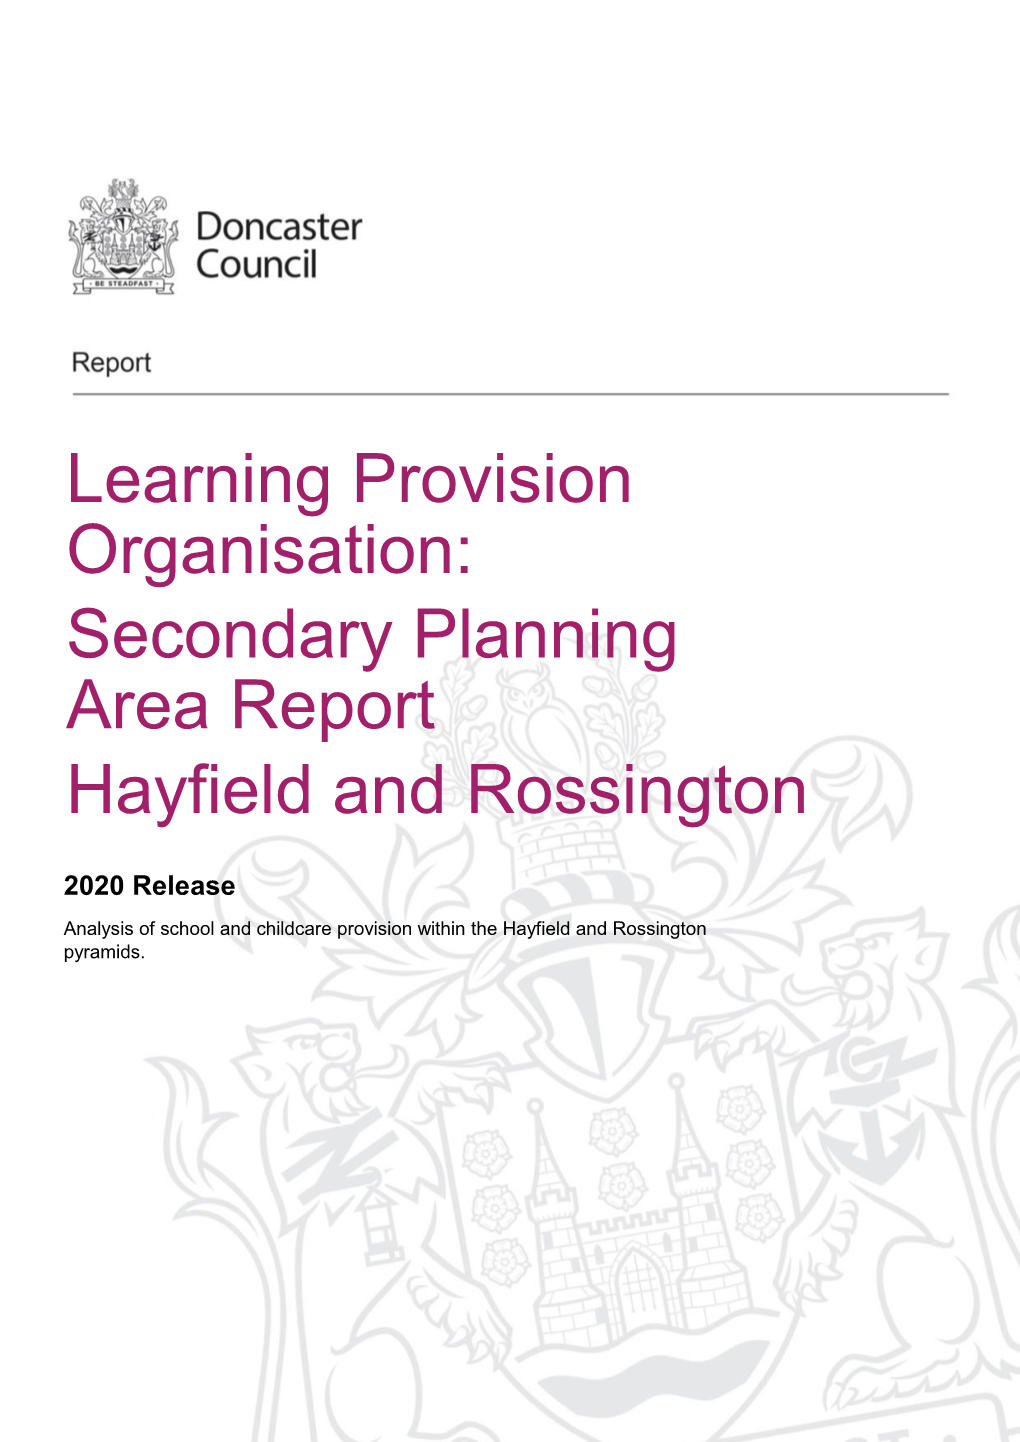 Secondary Planning Area Report Hayfield and Rossington